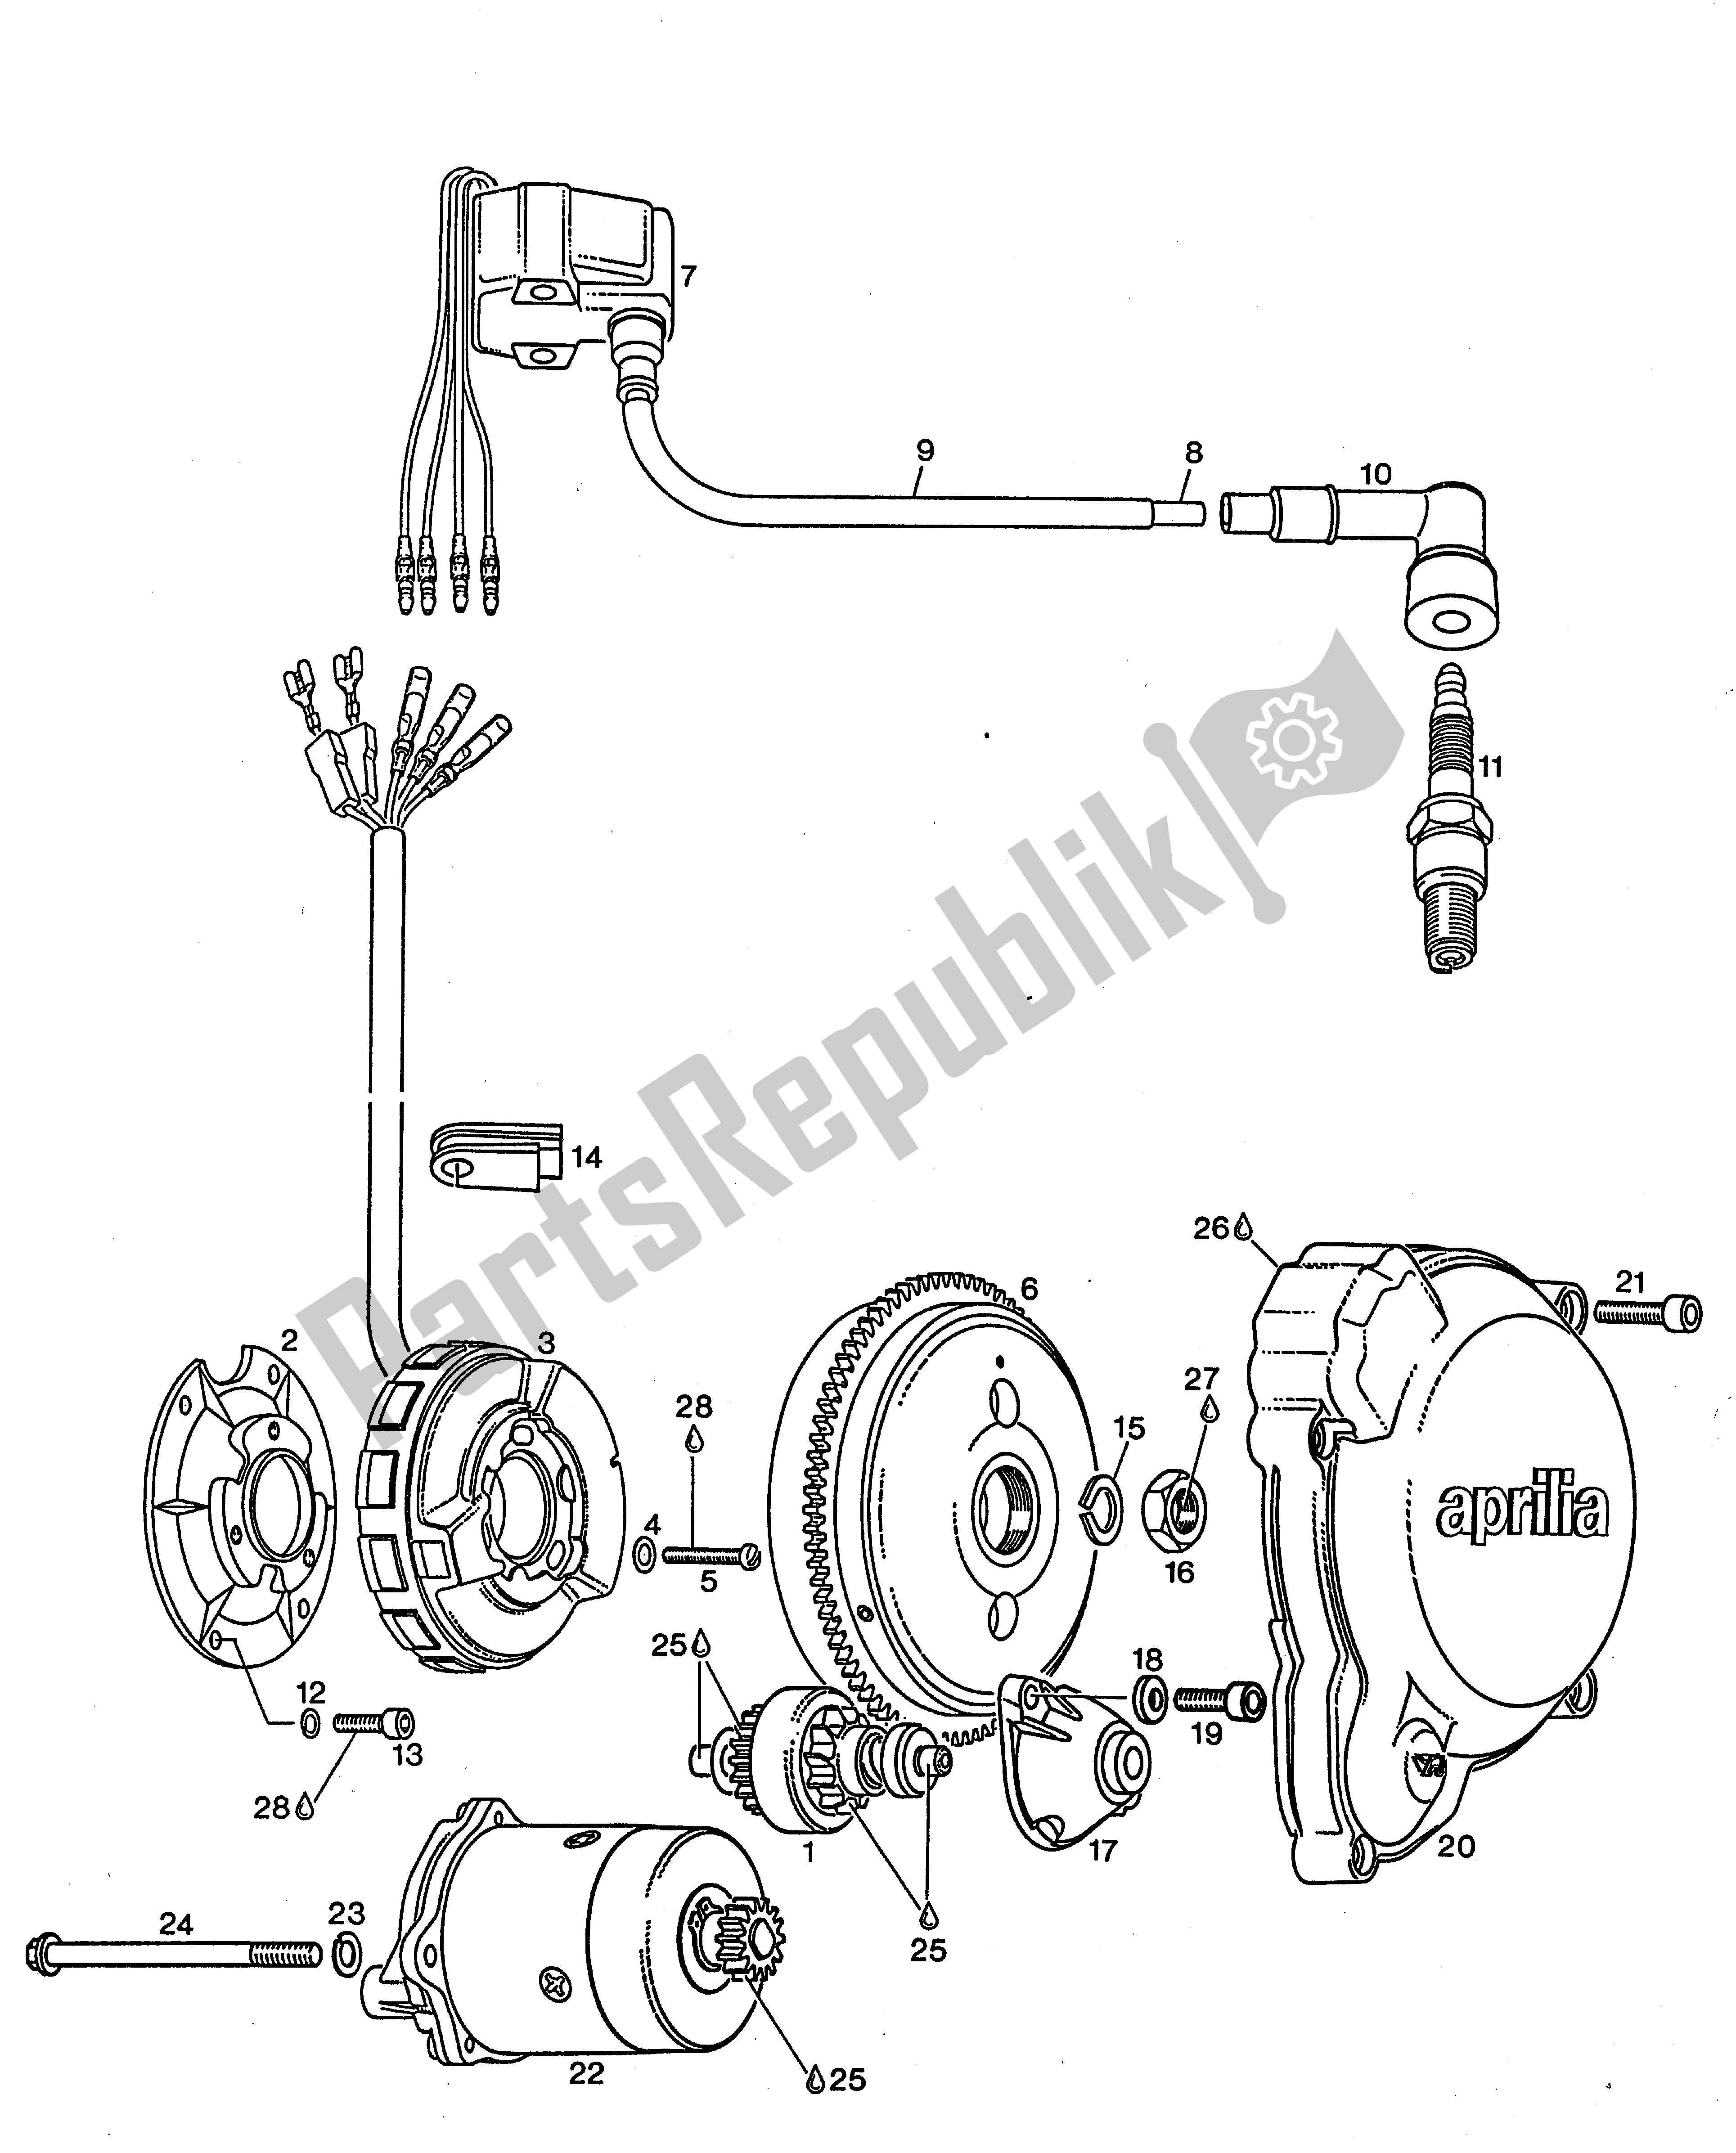 All parts for the Sem Magneto Generator, Electric Starter, Ignitioncover of the Aprilia Rotax 123 125 1990 - 2000